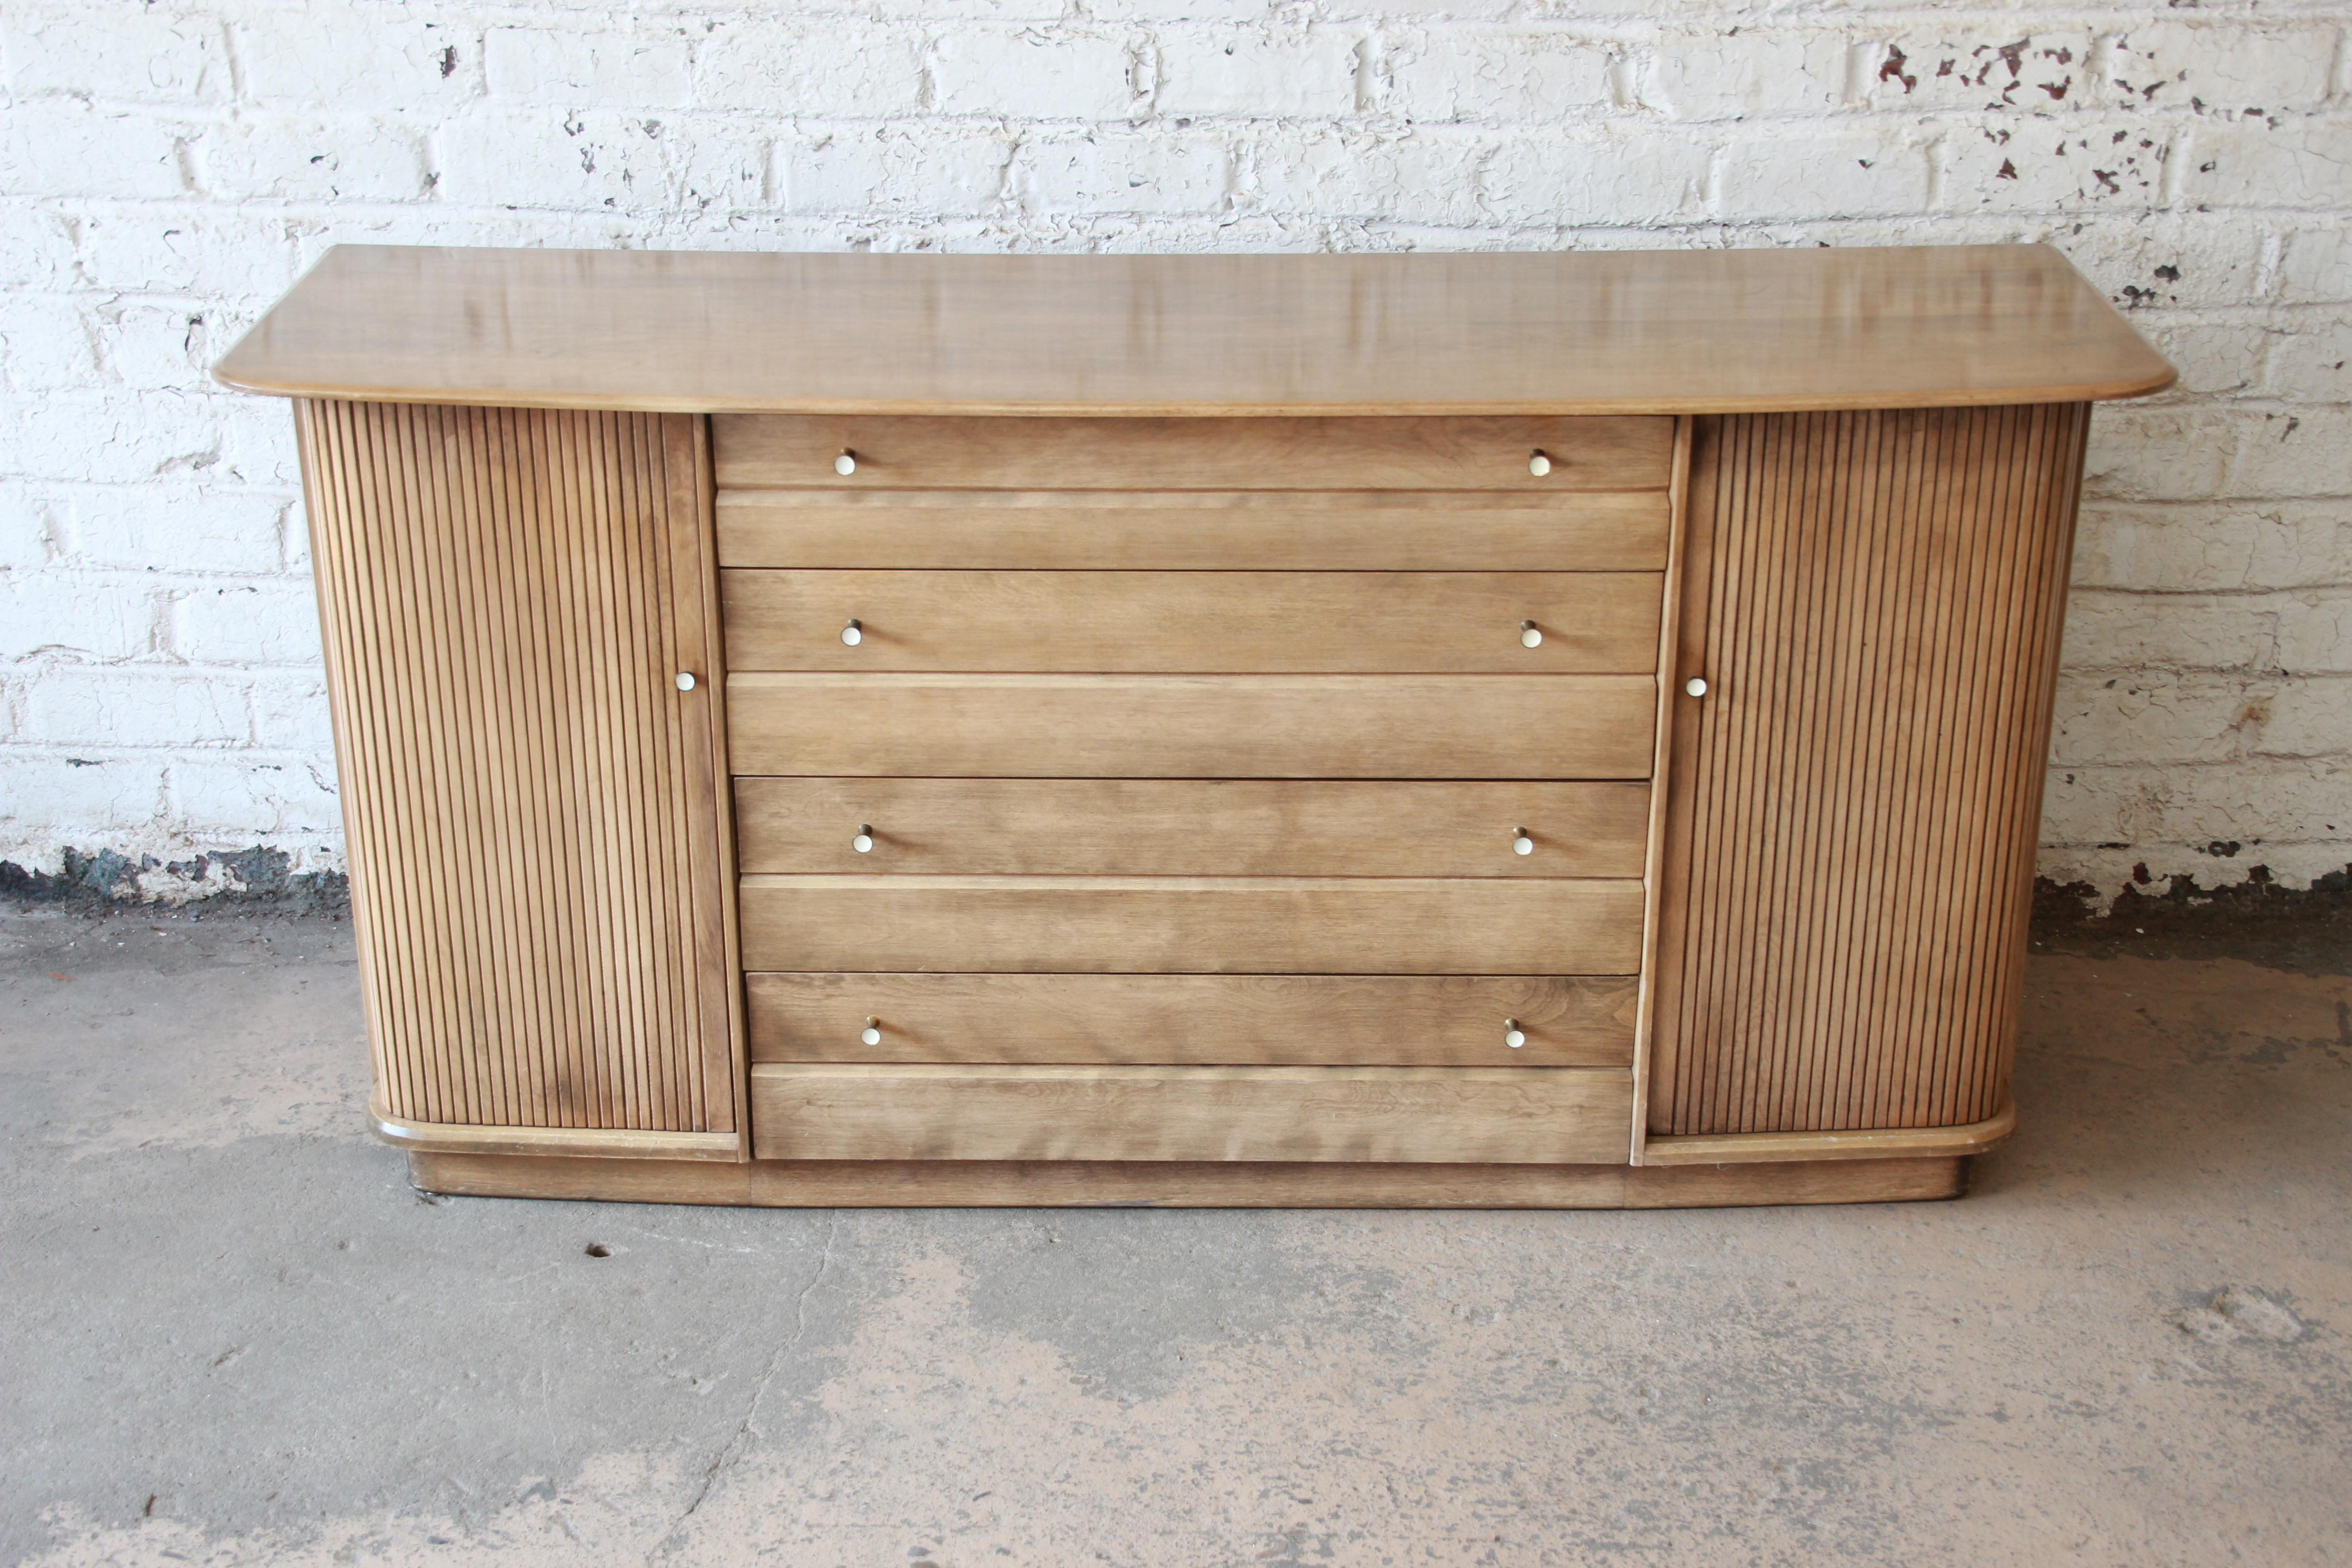 A very nice solid maple sideboard buffet or credenza by Heywood Wakefield. The sideboard features beautiful wood grain and clean midcentury lines. It offers ample room for storage, with two shelved cabinets behind tambour doors on each side and four